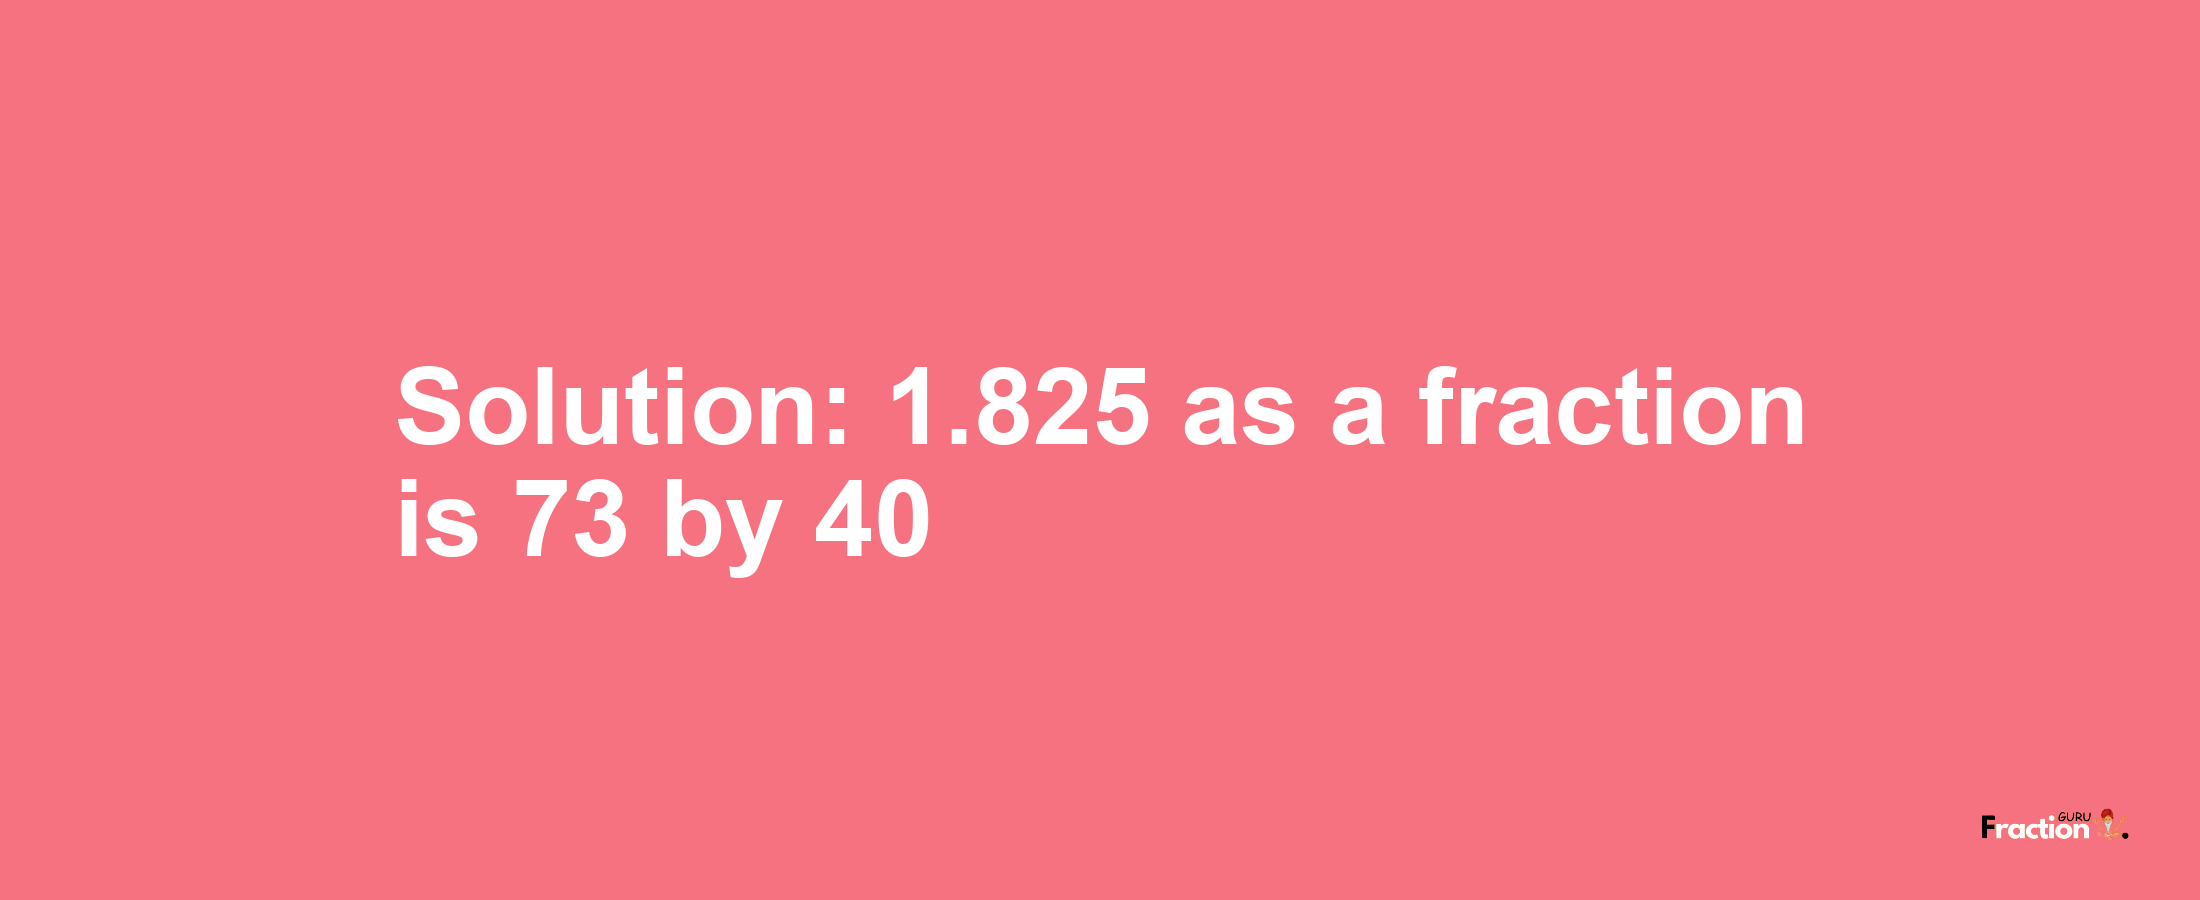 Solution:1.825 as a fraction is 73/40